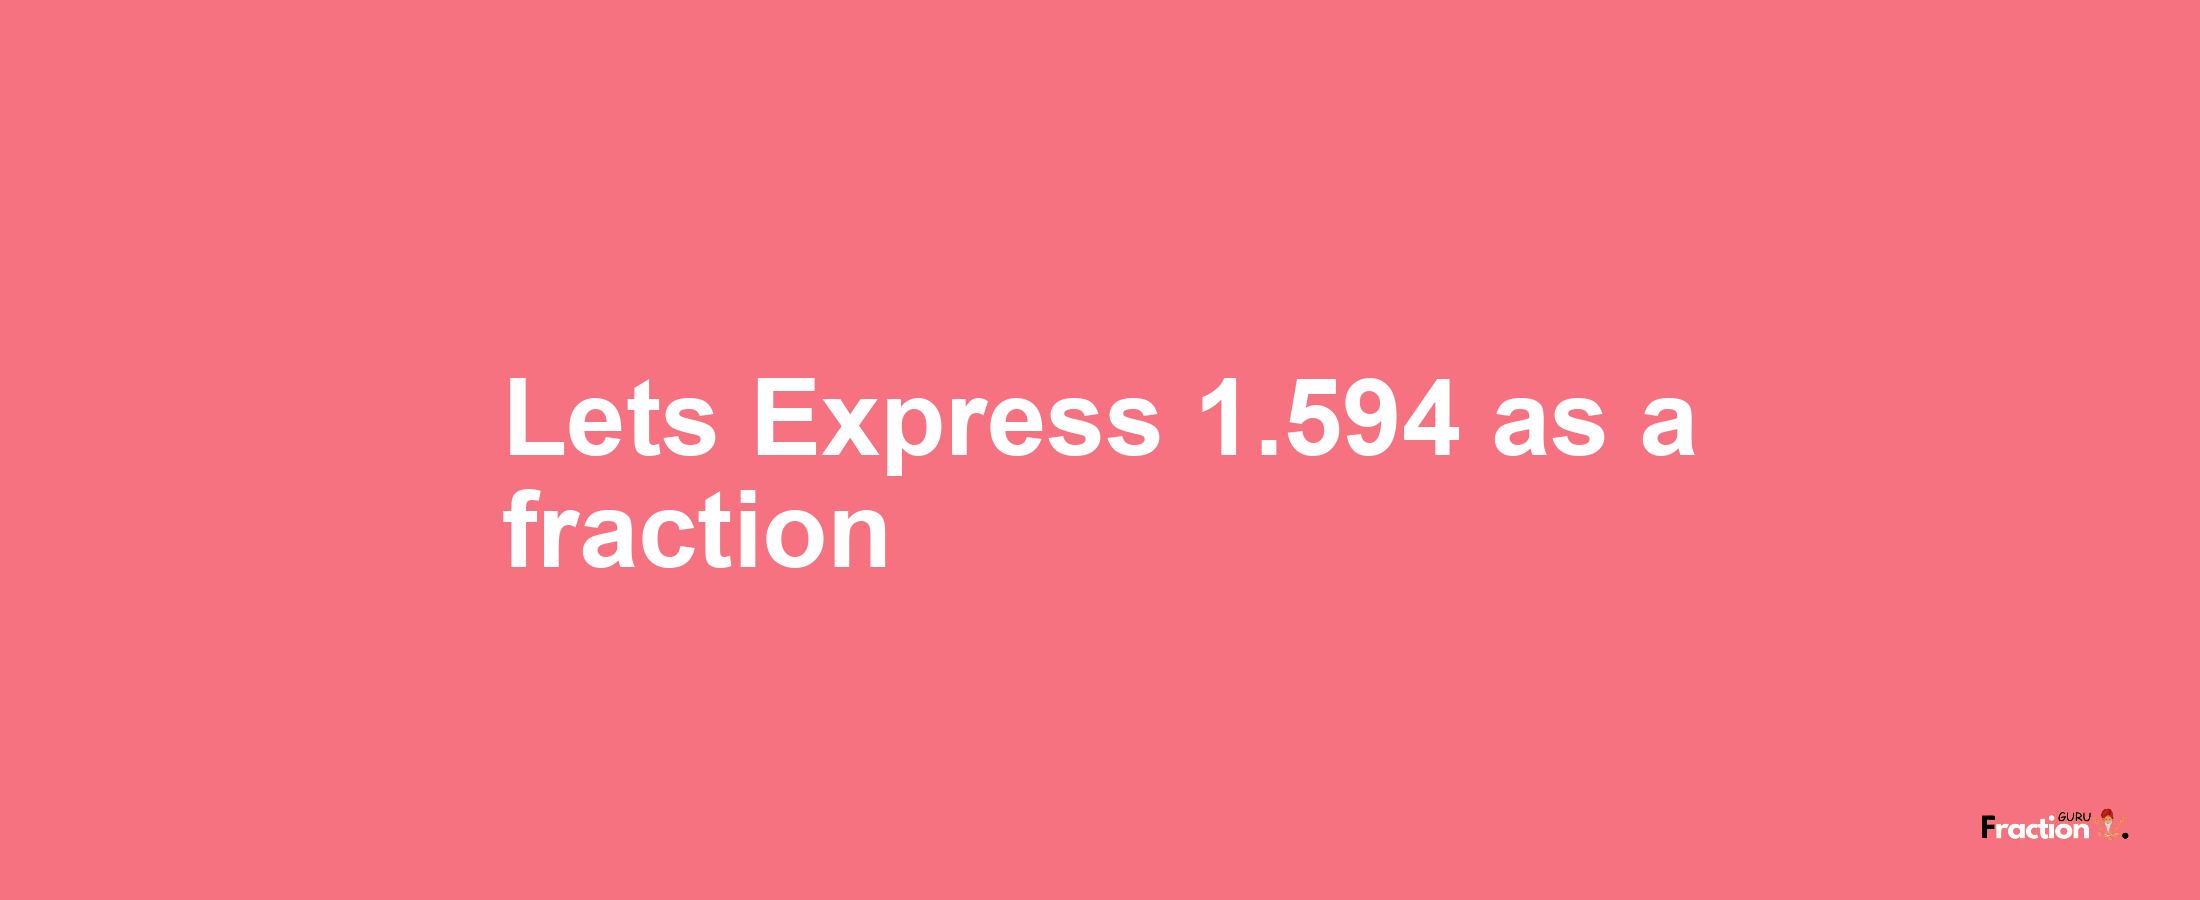 Lets Express 1.594 as afraction